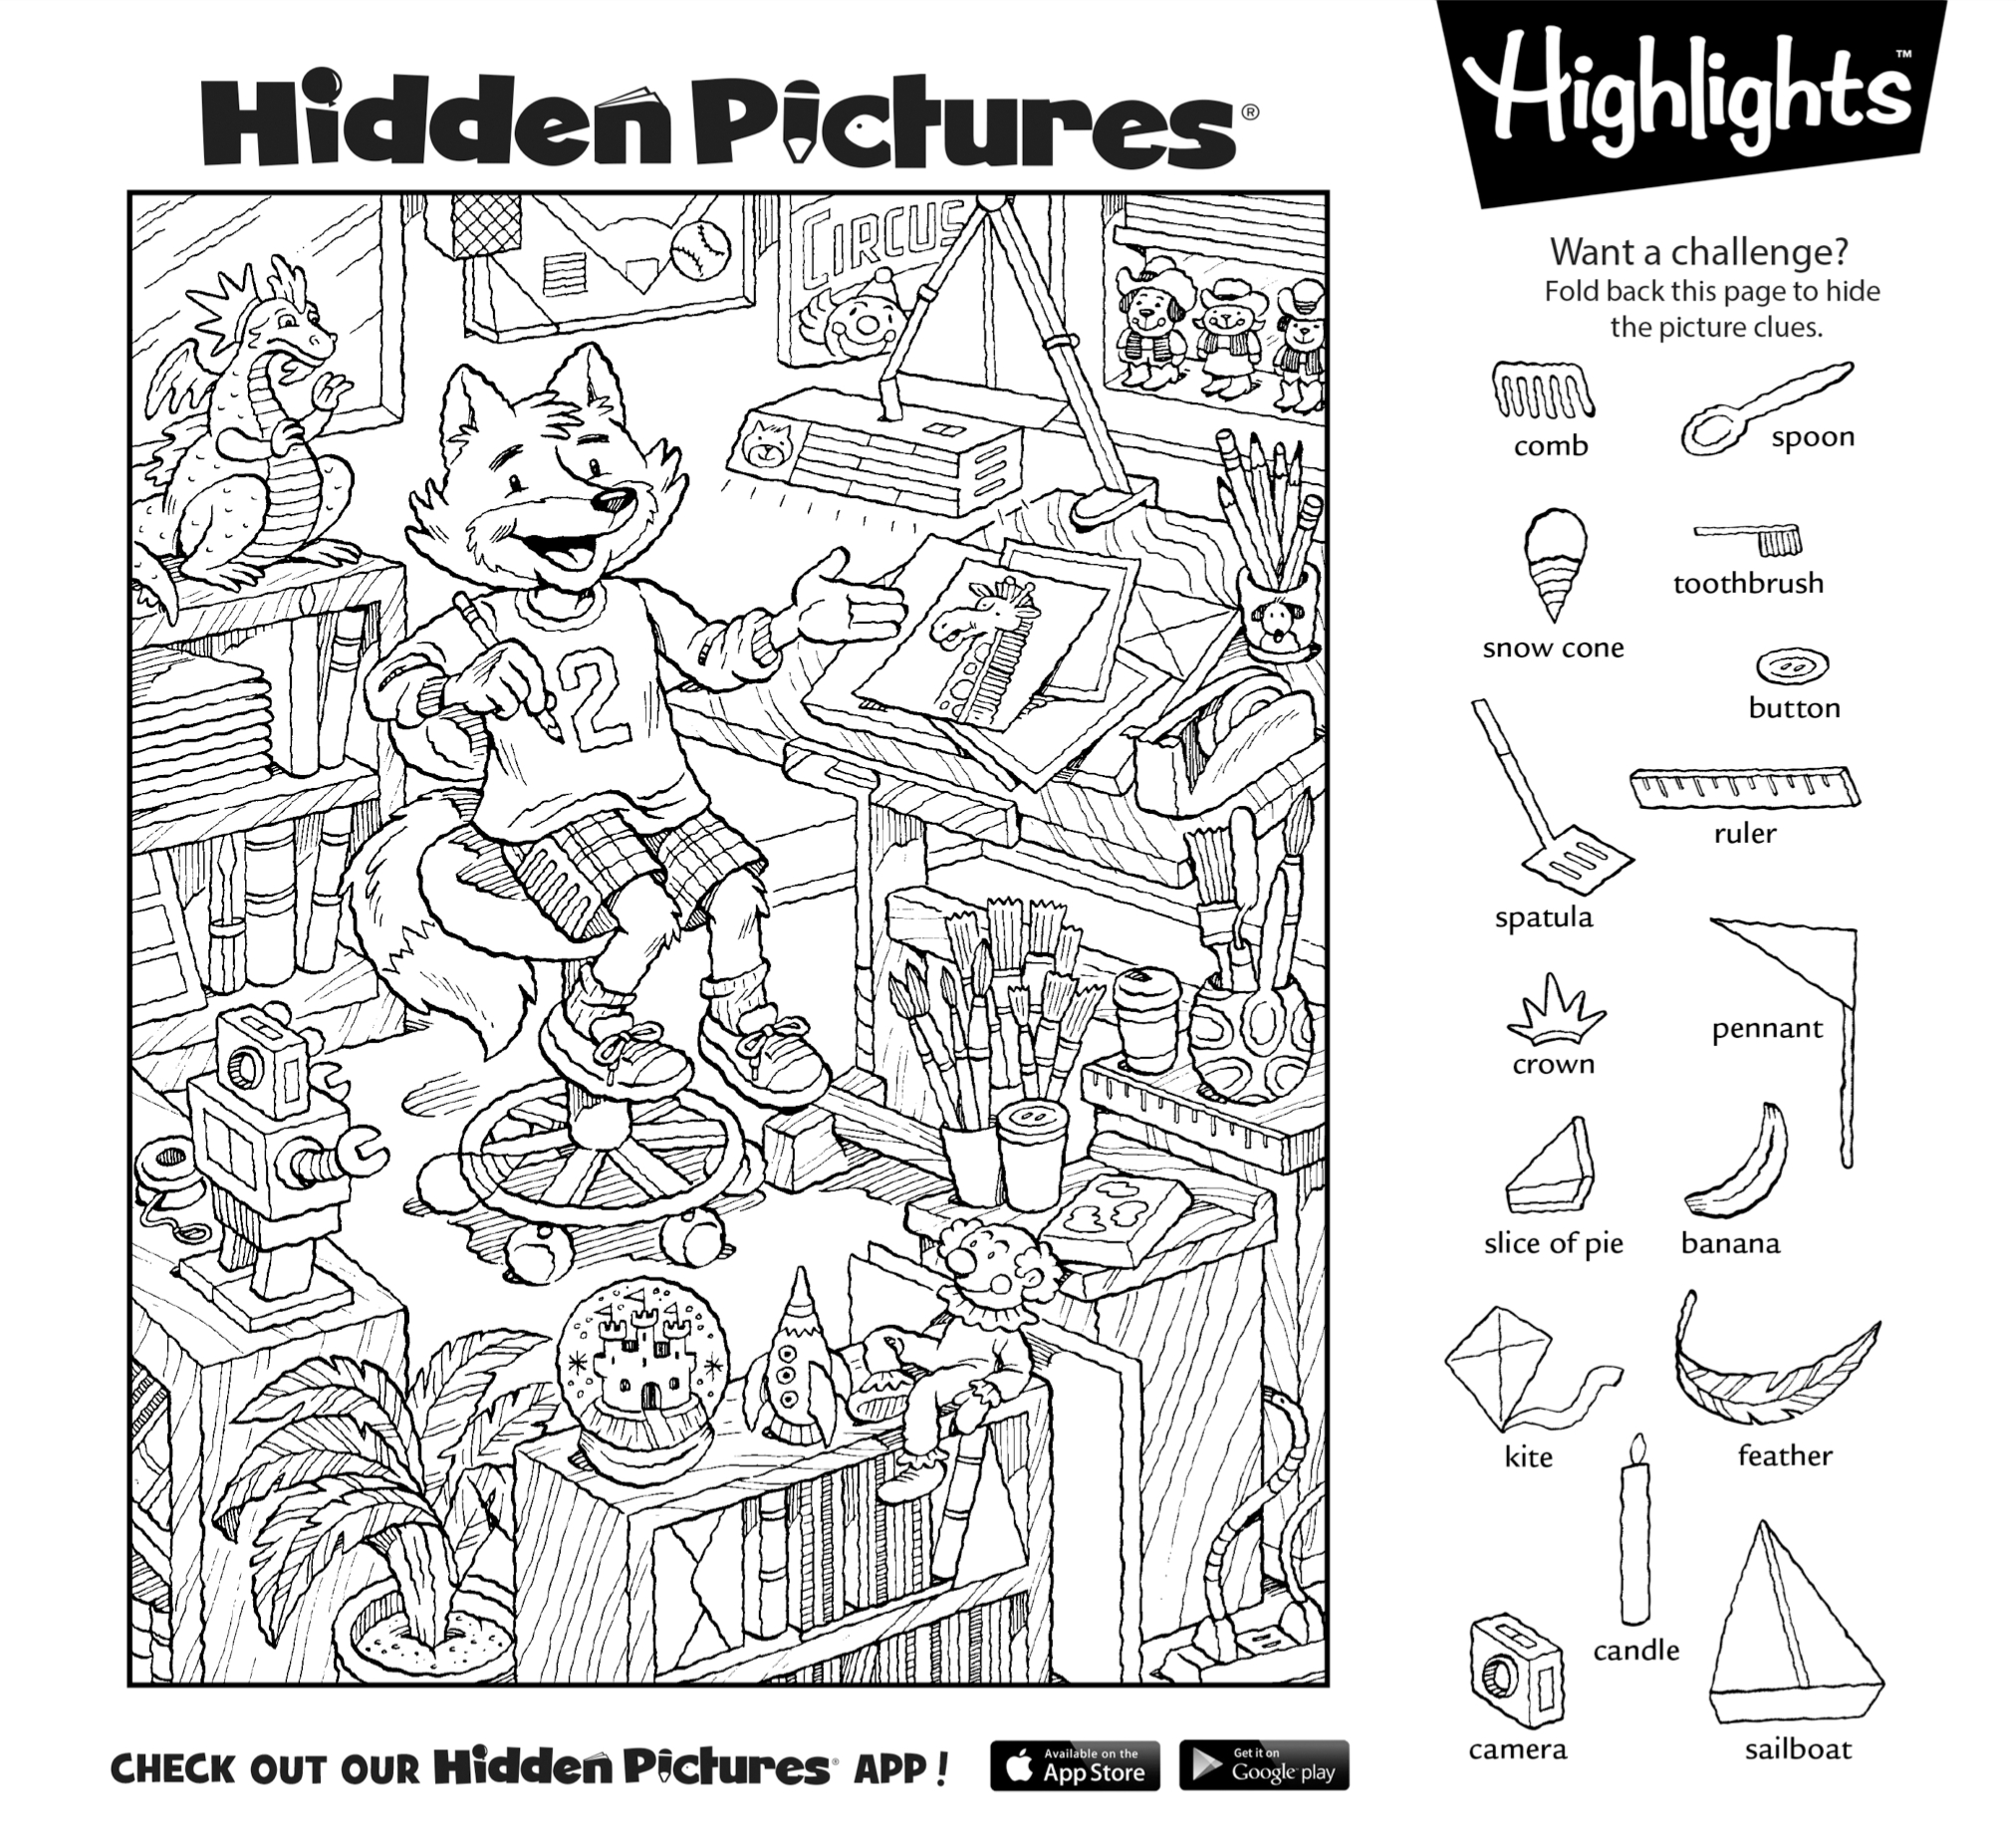 Download This Free Printable Hidden Pictures Puzzle To Share With - Free Printable Hidden Picture Puzzles For Adults